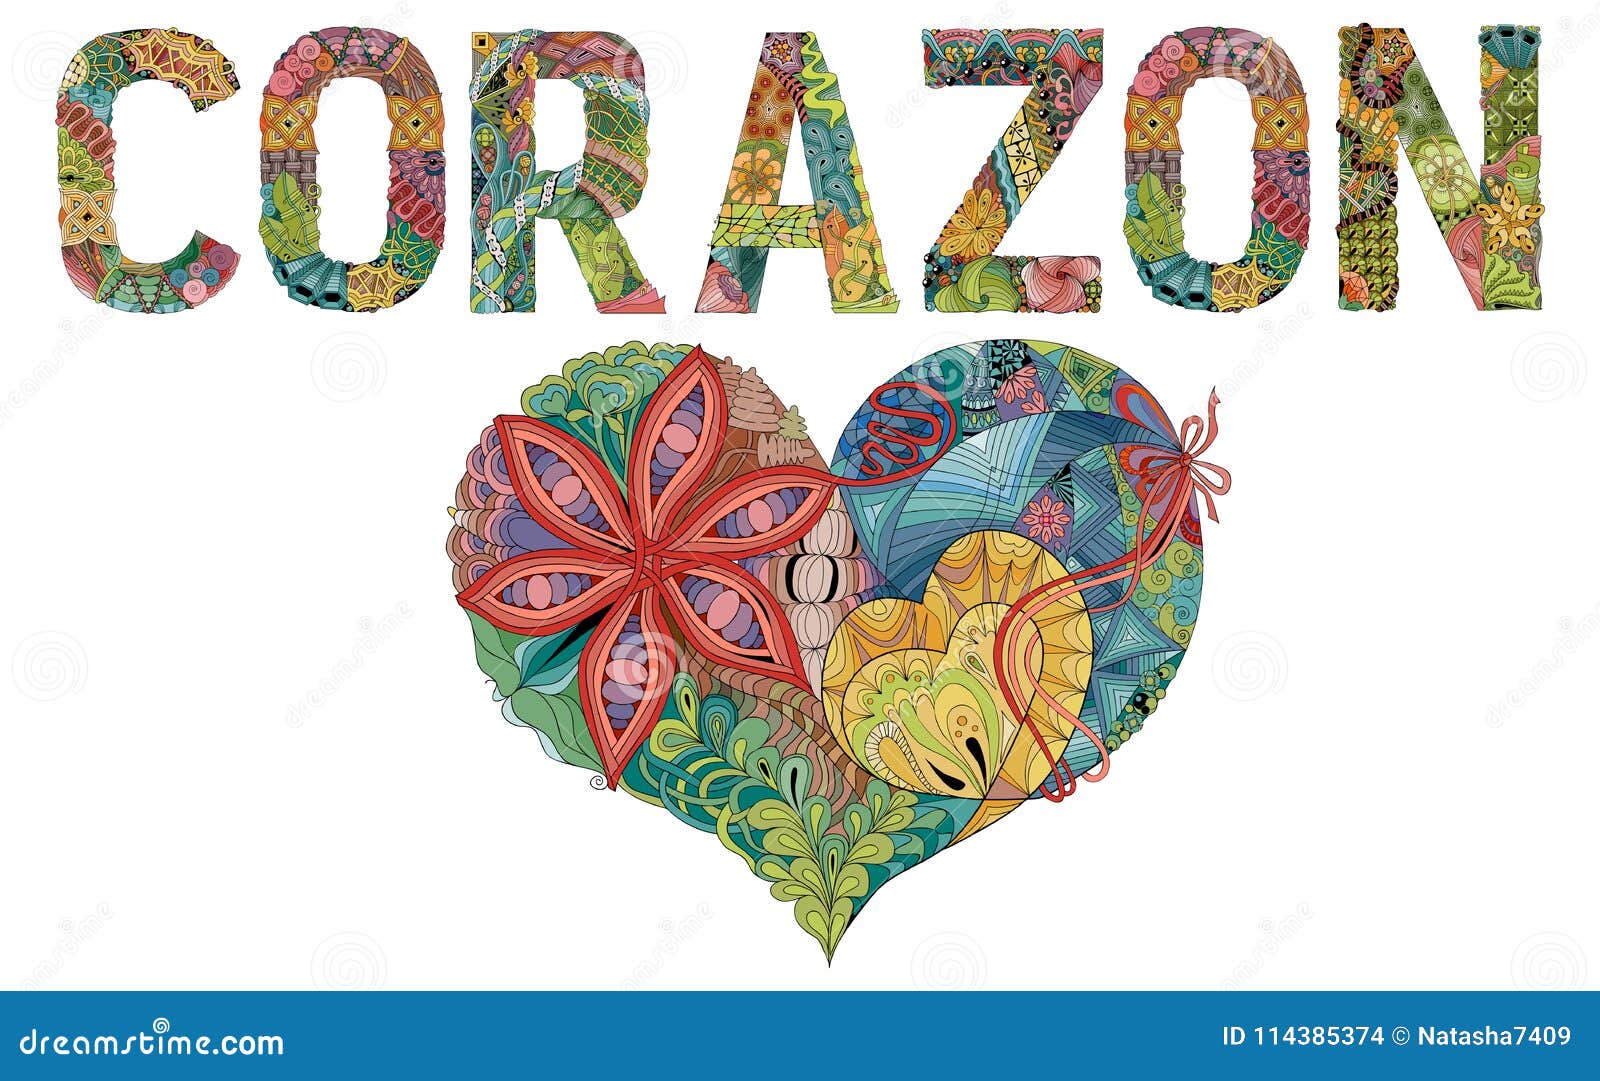 word corazon with  of heart. heart in spanish.  decorative zentangle object